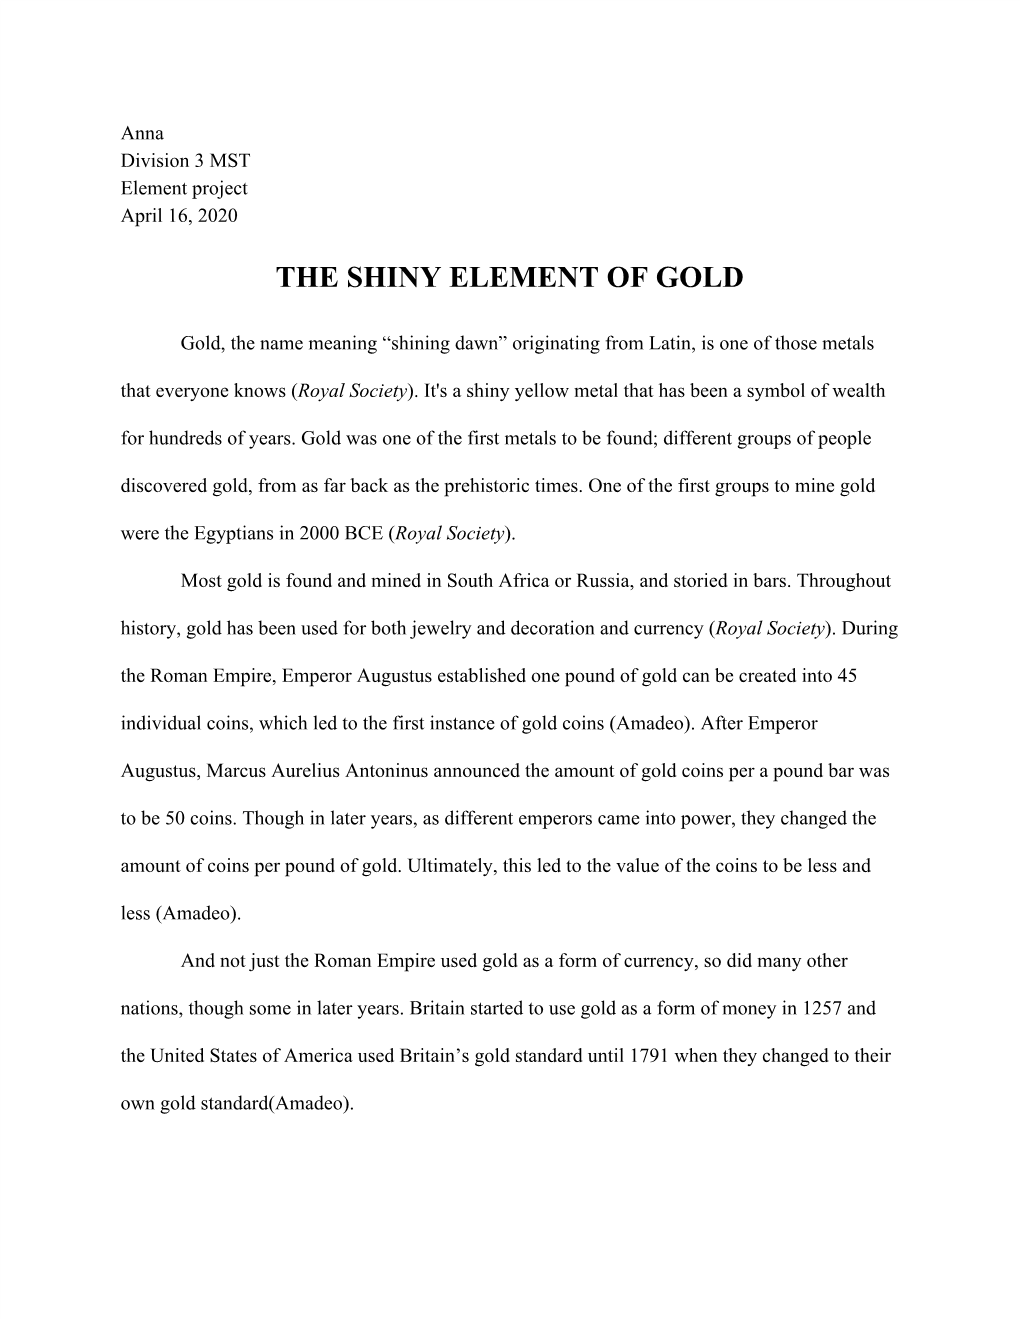 The Shiny Element of Gold